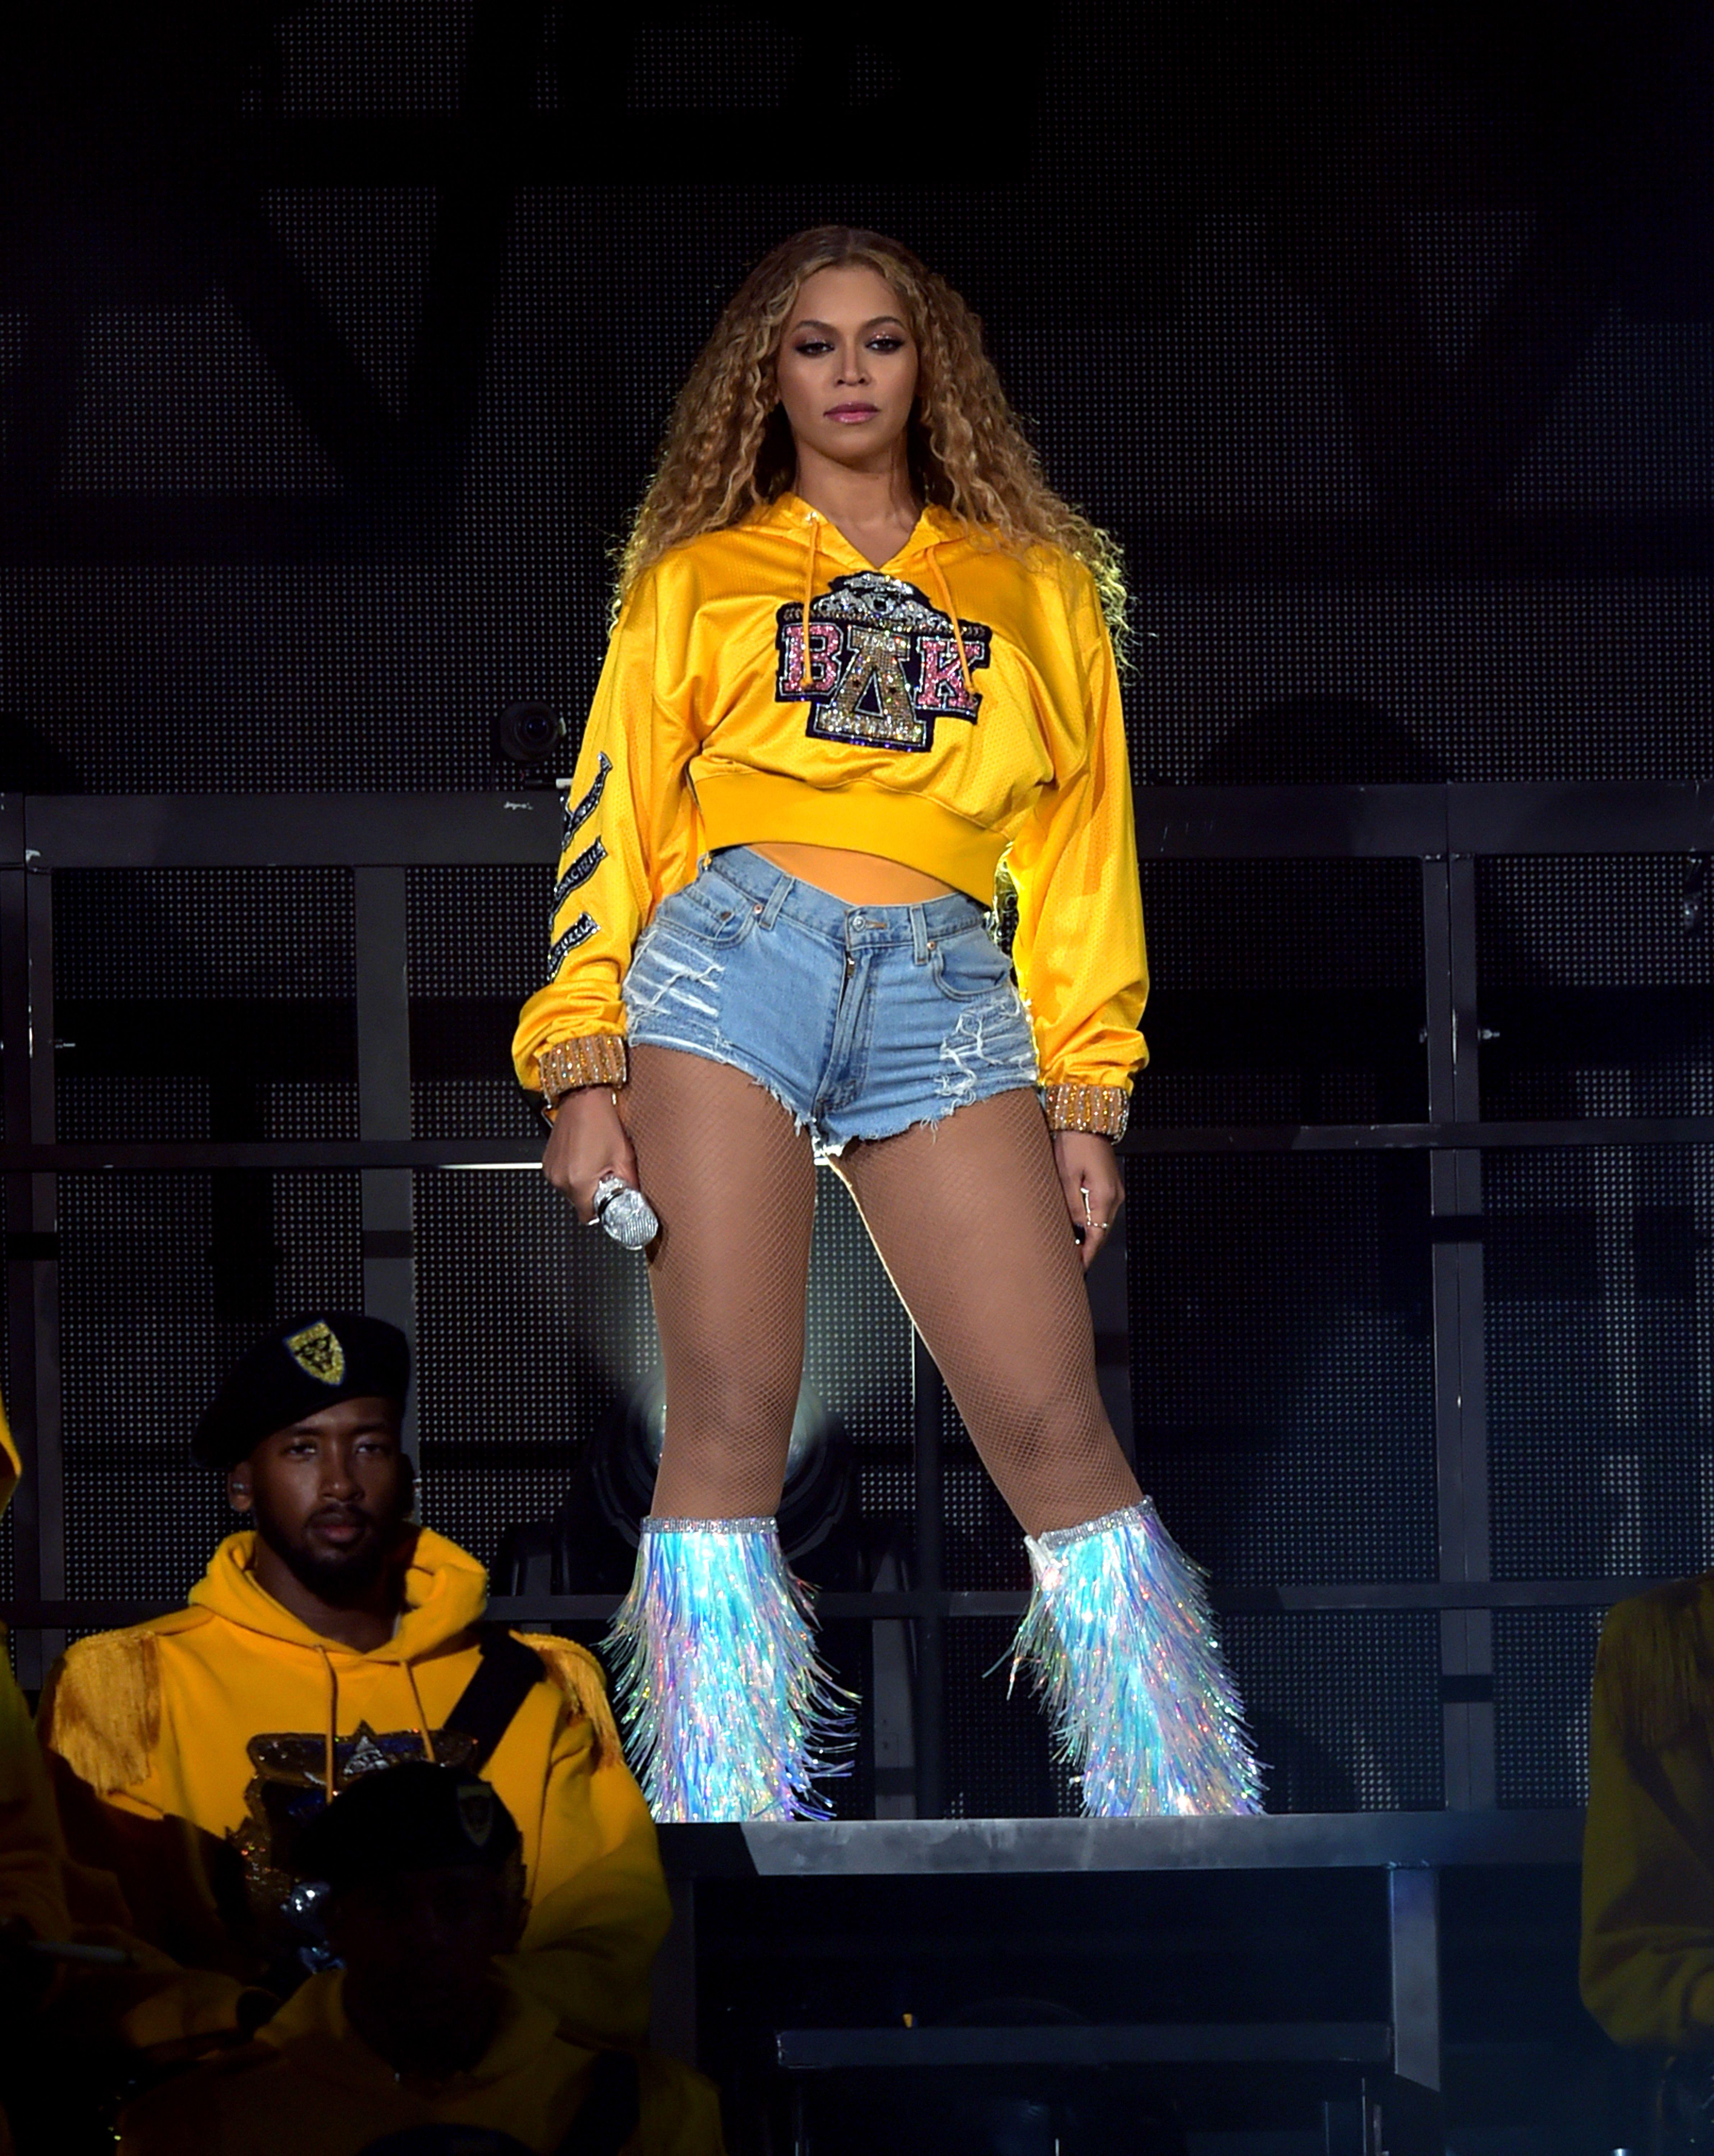 Beyonce Became the First Black Woman to Headline Coachella